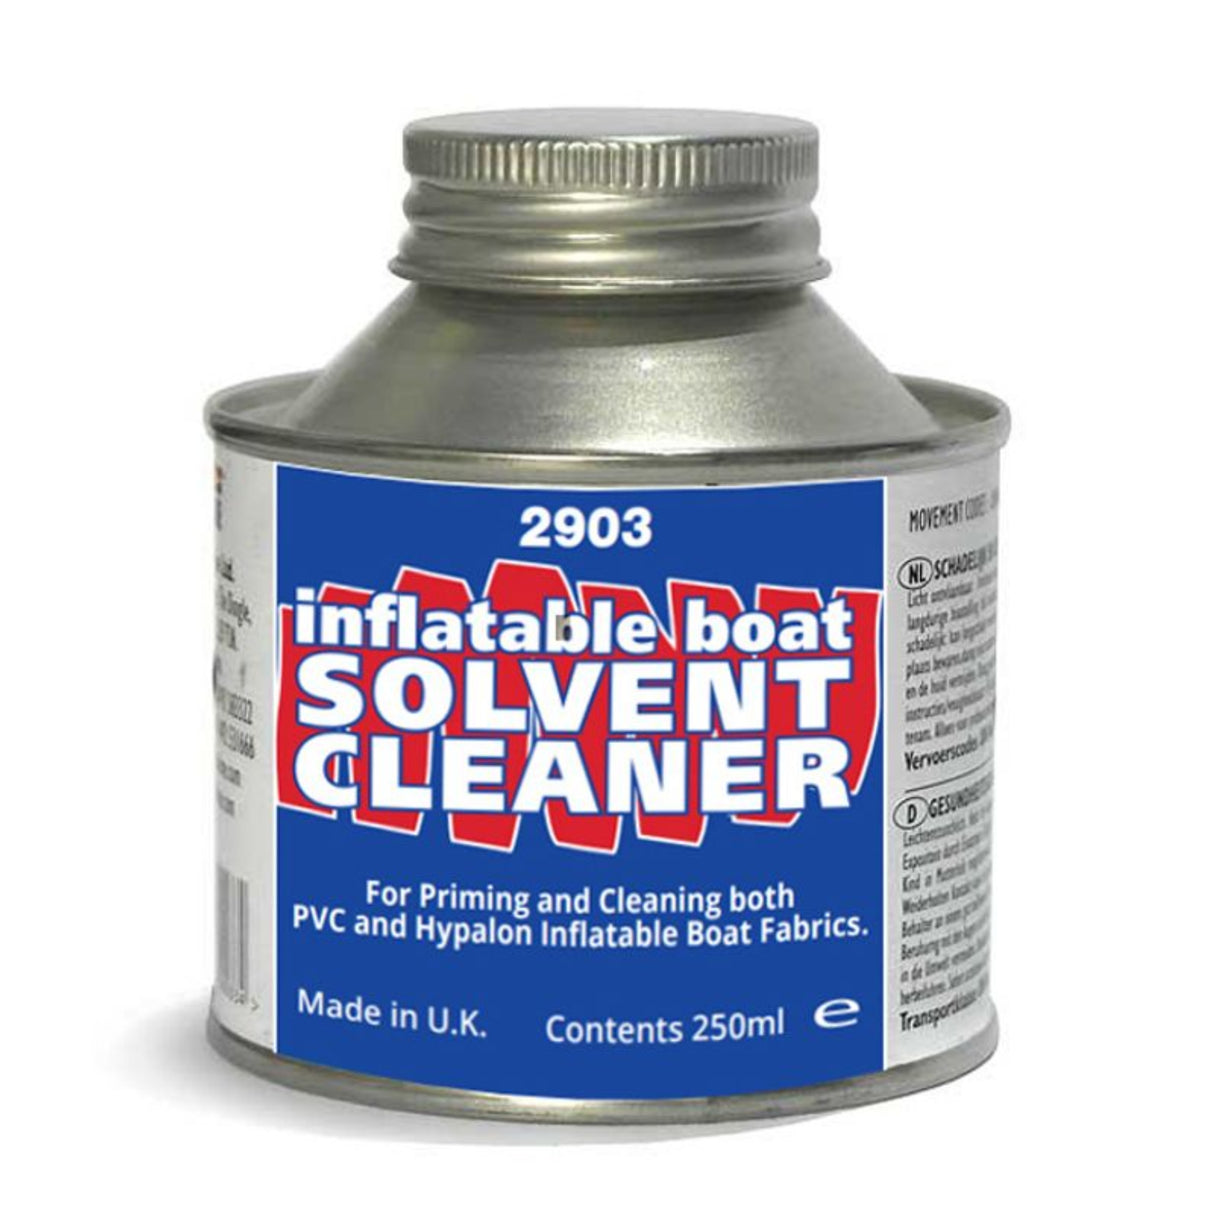 Polymarine 2903 Inflatable Boat Solvent Cleaner - 250ml